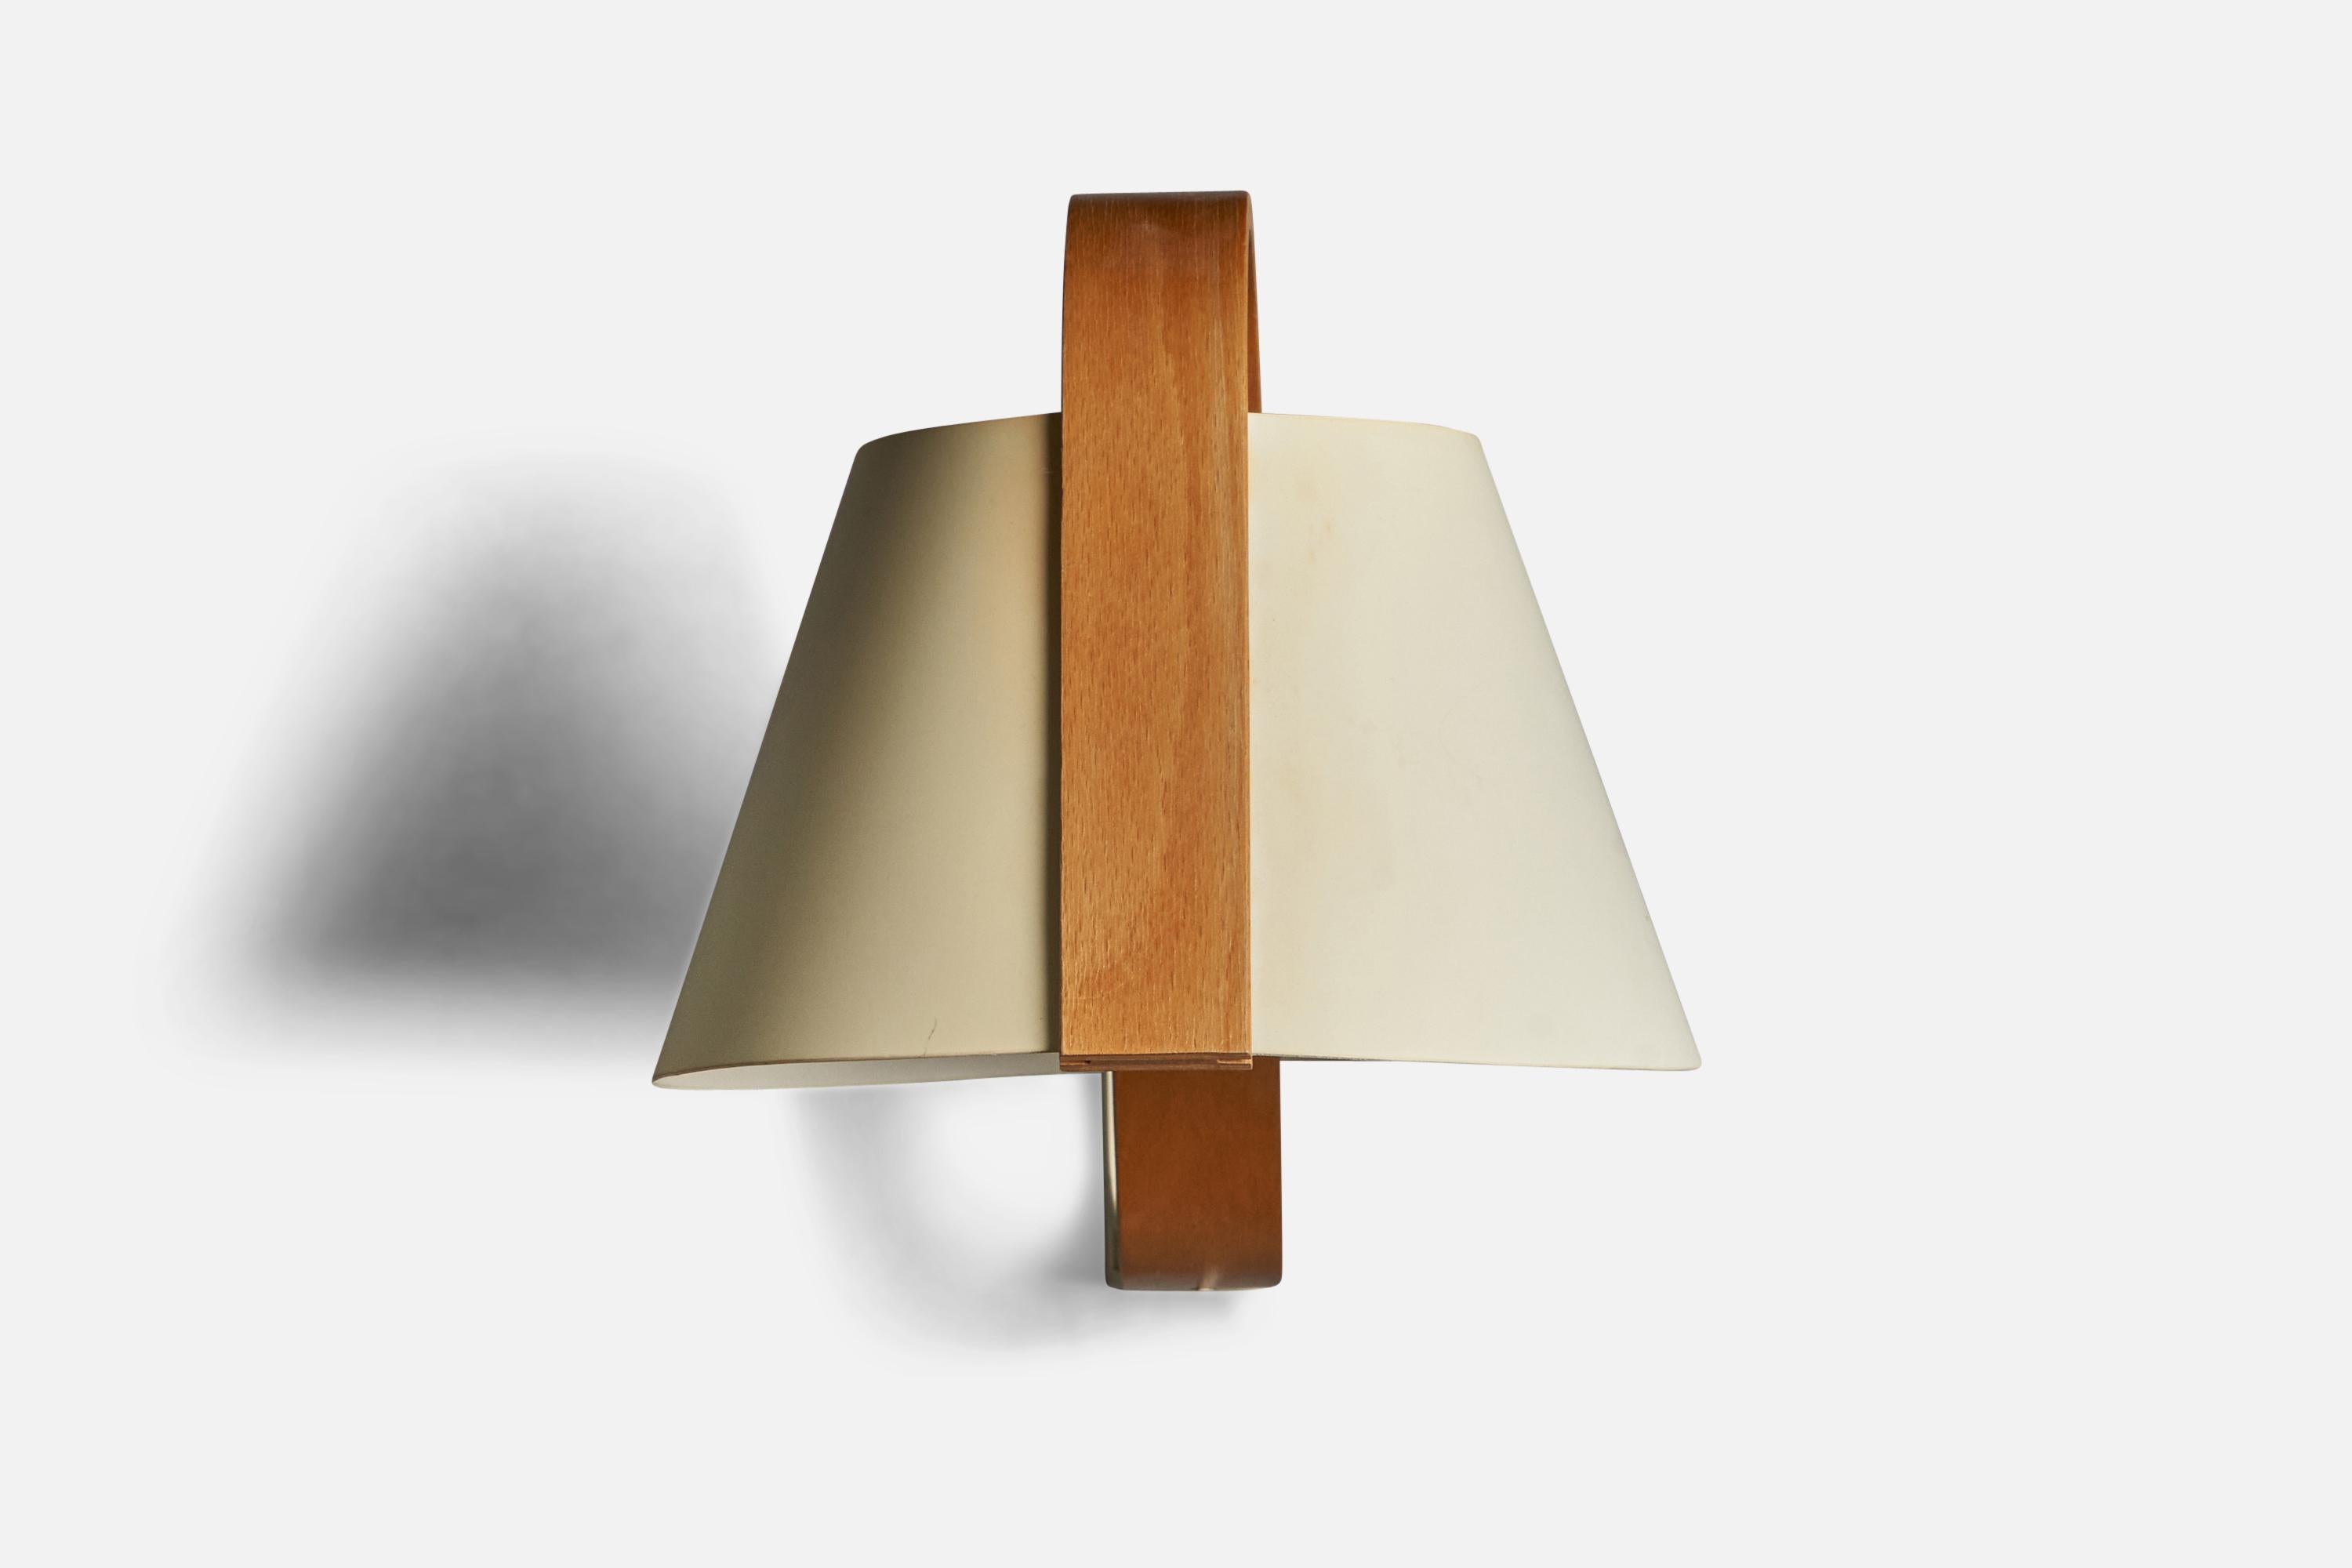 An adjustable bentwood, paper and plastic wall light designed and produced in Sweden, c. 1980s.

Please note lamp functions via plug in, cord feeding from stem close to backplate.

Overall Dimensions (inches): 10.75” H x 9.15” W x 14.5” D

Back